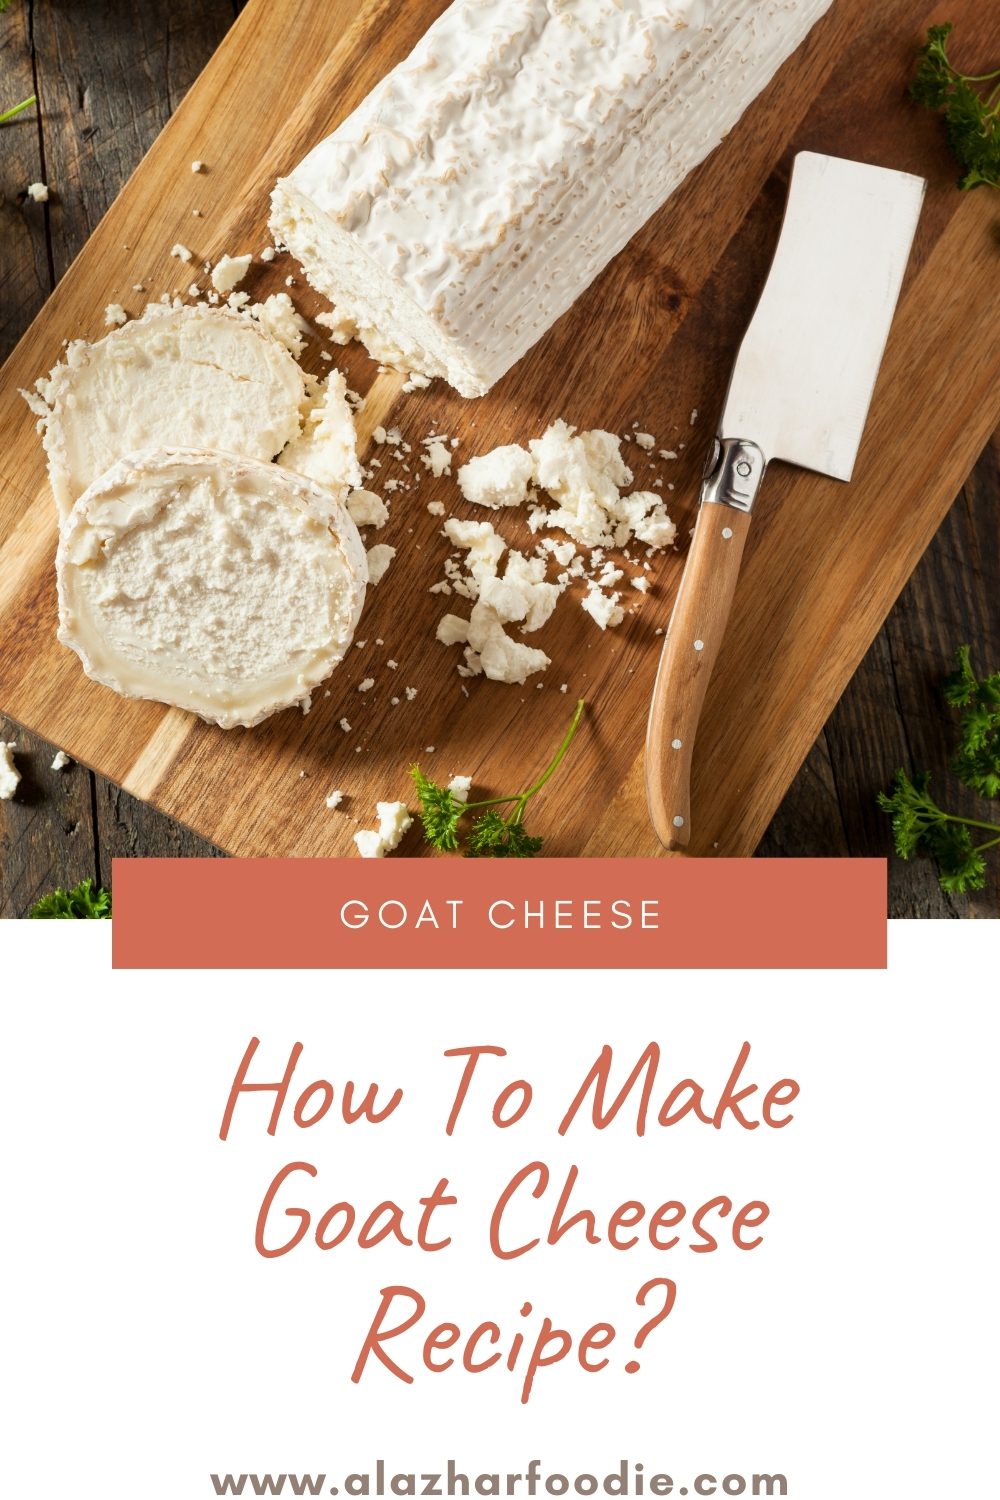 How To Make Goat Cheese Recipe? » Al Azhar Foodie